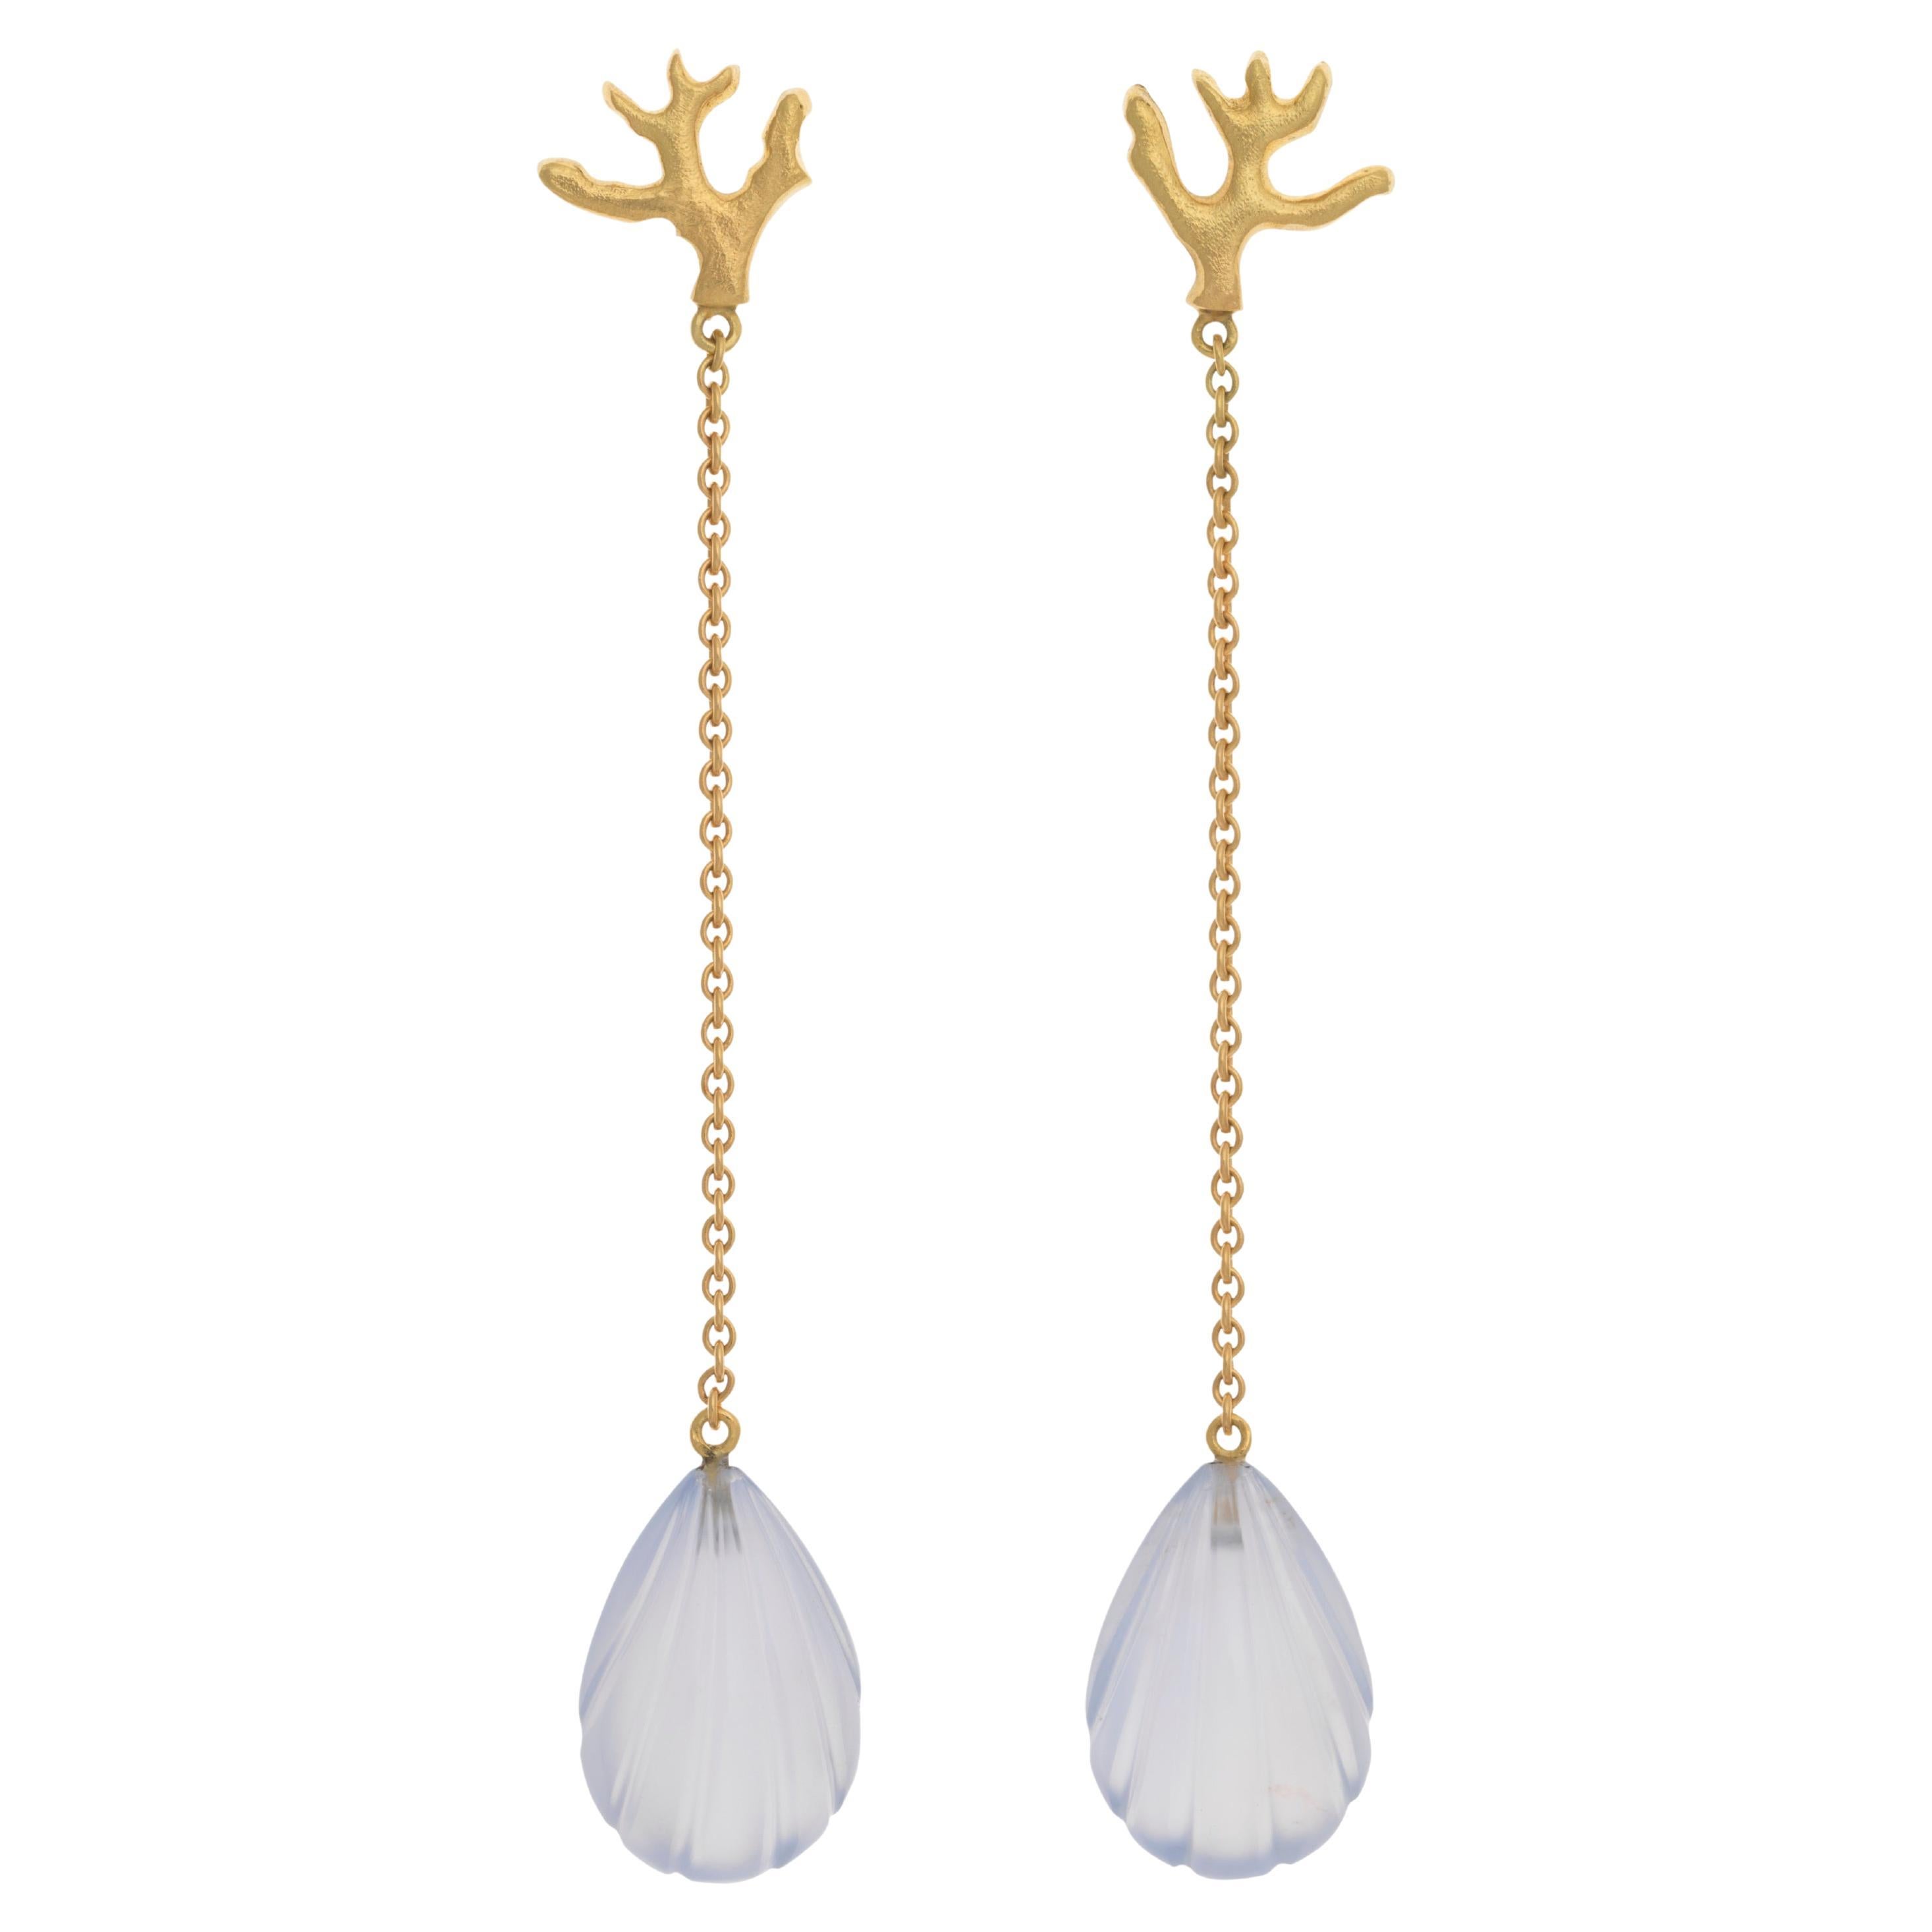 18k Gold Chain Earrings With Shells Carved From Pale Lavender Blue Chalcedony For Sale